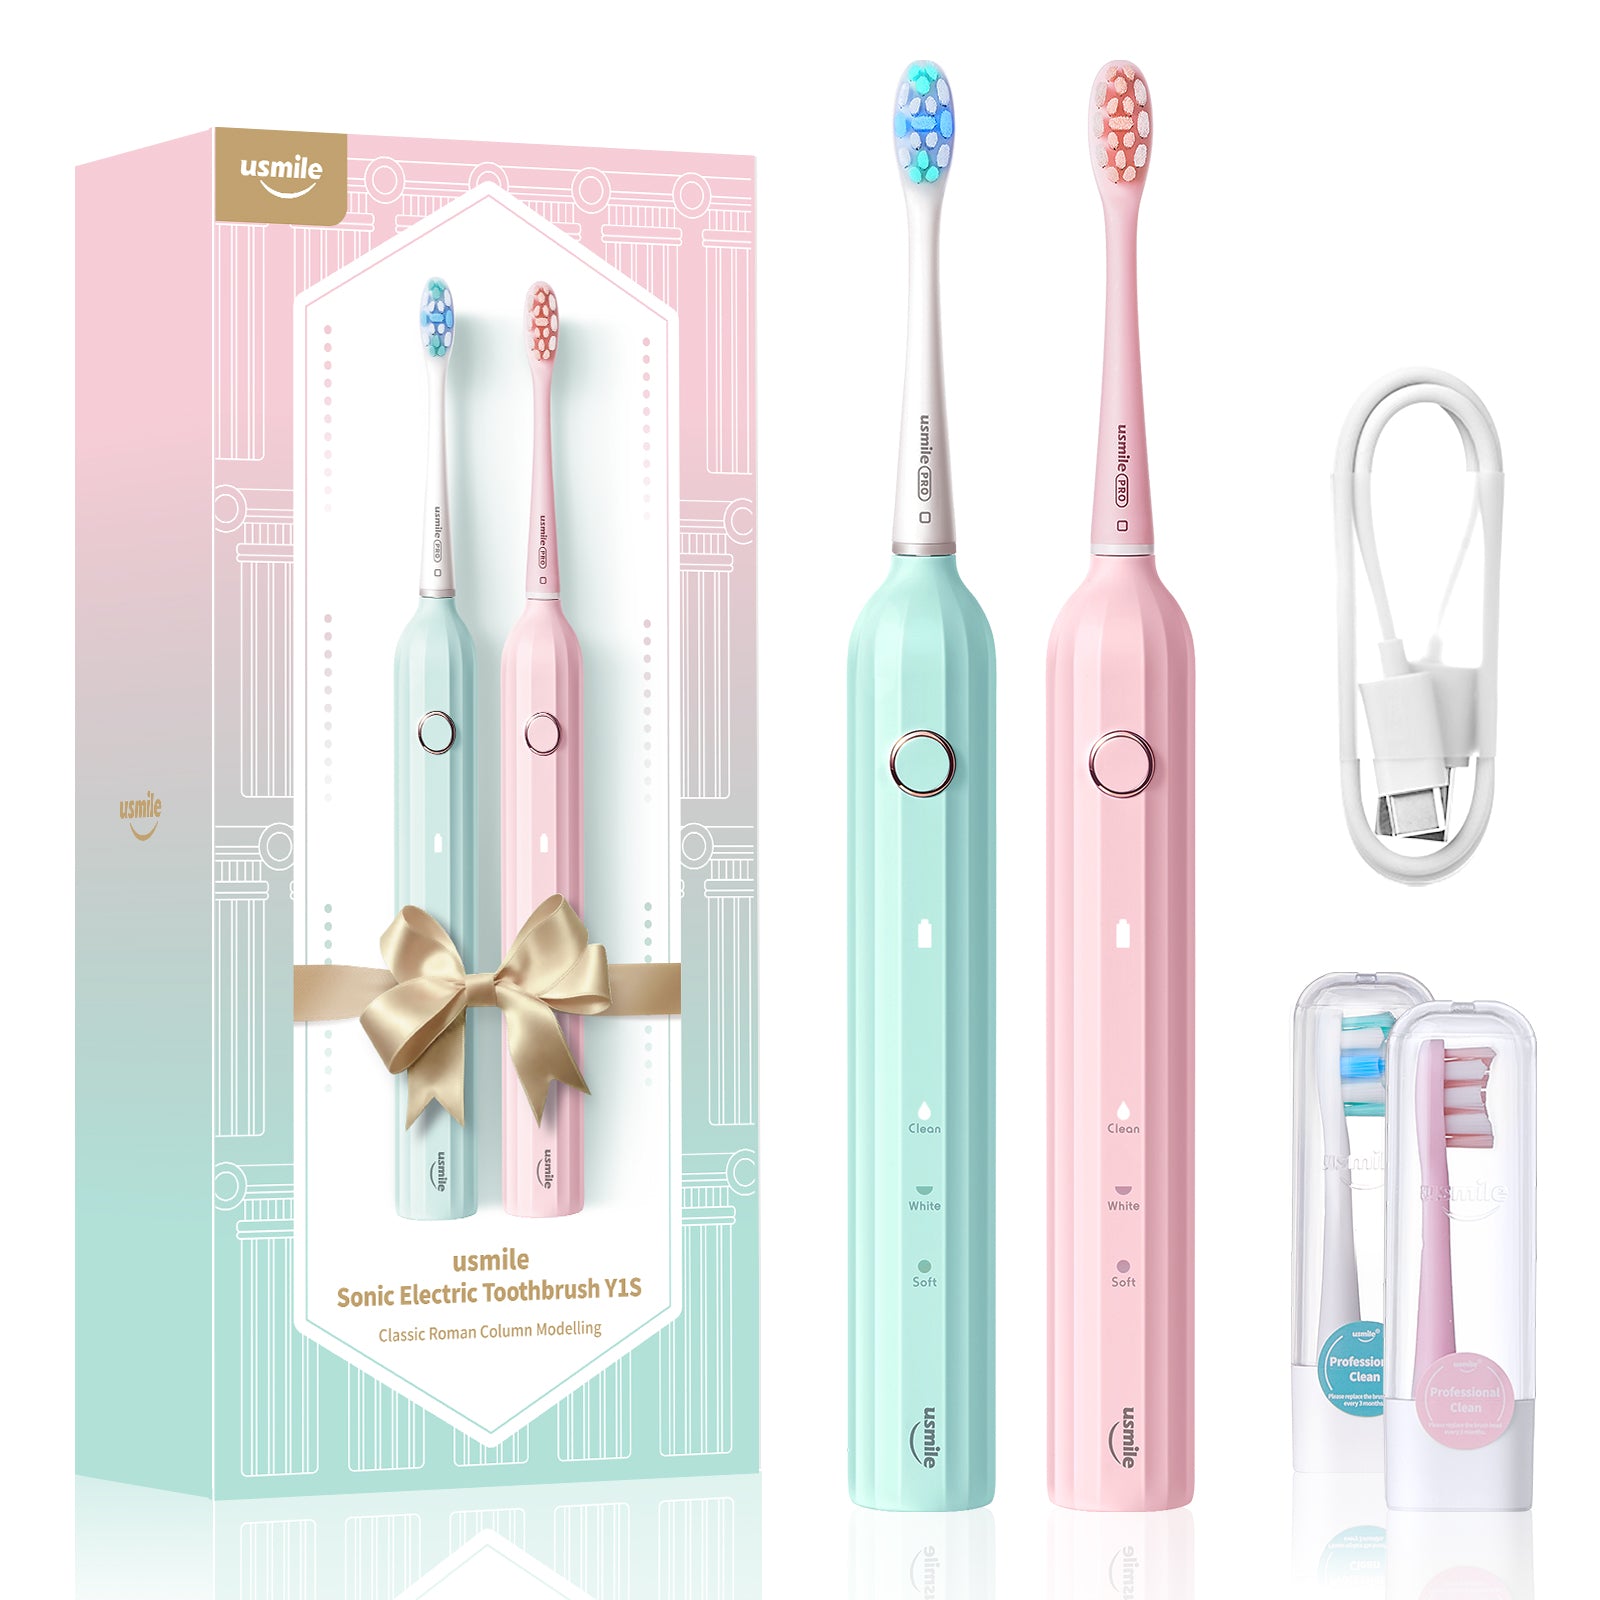 usmile Y1s Sonic Electric Toothbrush with 4 Brush Heads, Ergonomic Grip Design, USB-C Fast Charge, 3 Modes with 2 Minutes Smart Timer, Green/Pink